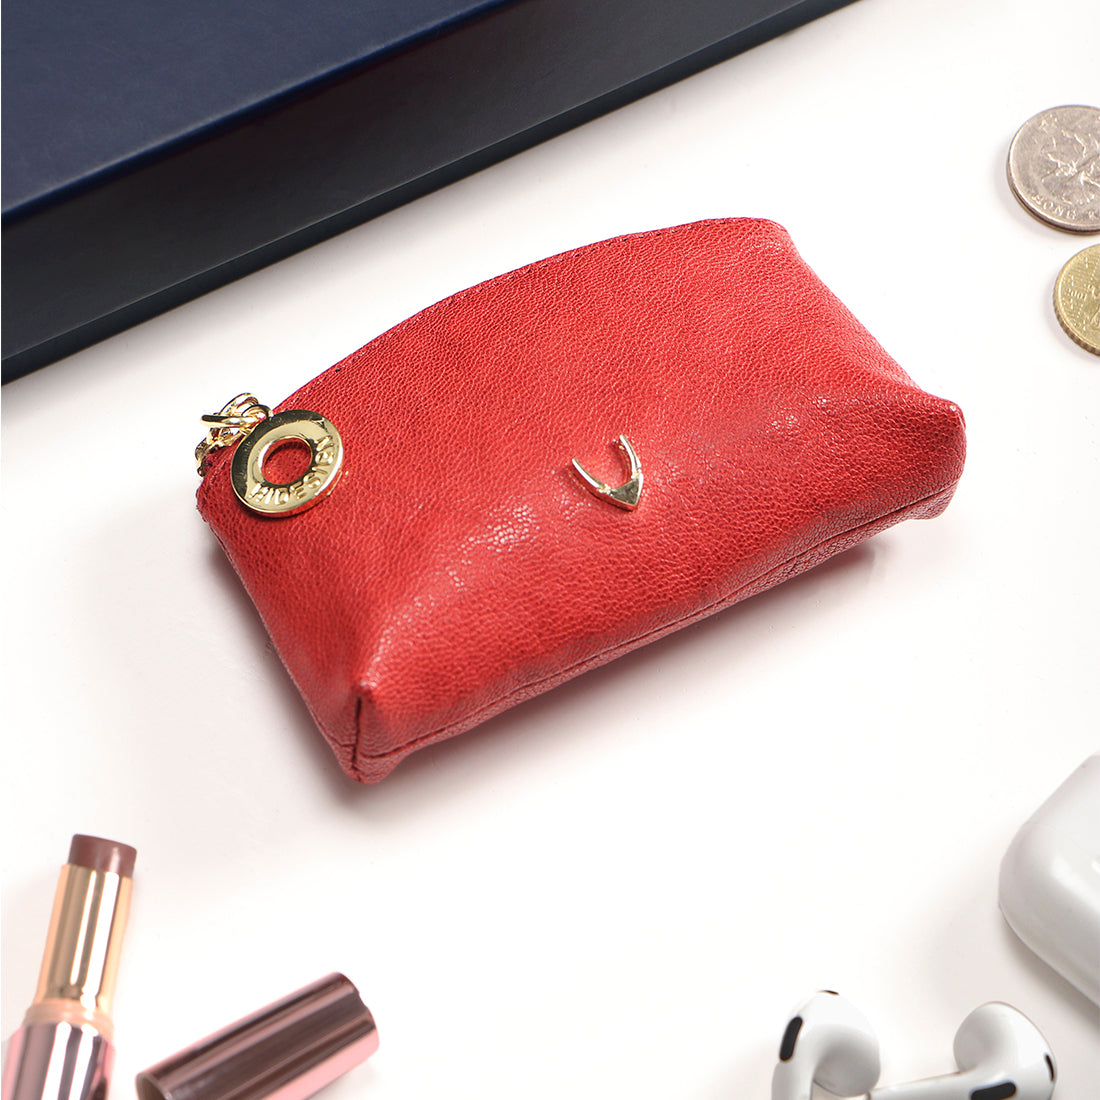 PIPPIN COIN POUCH